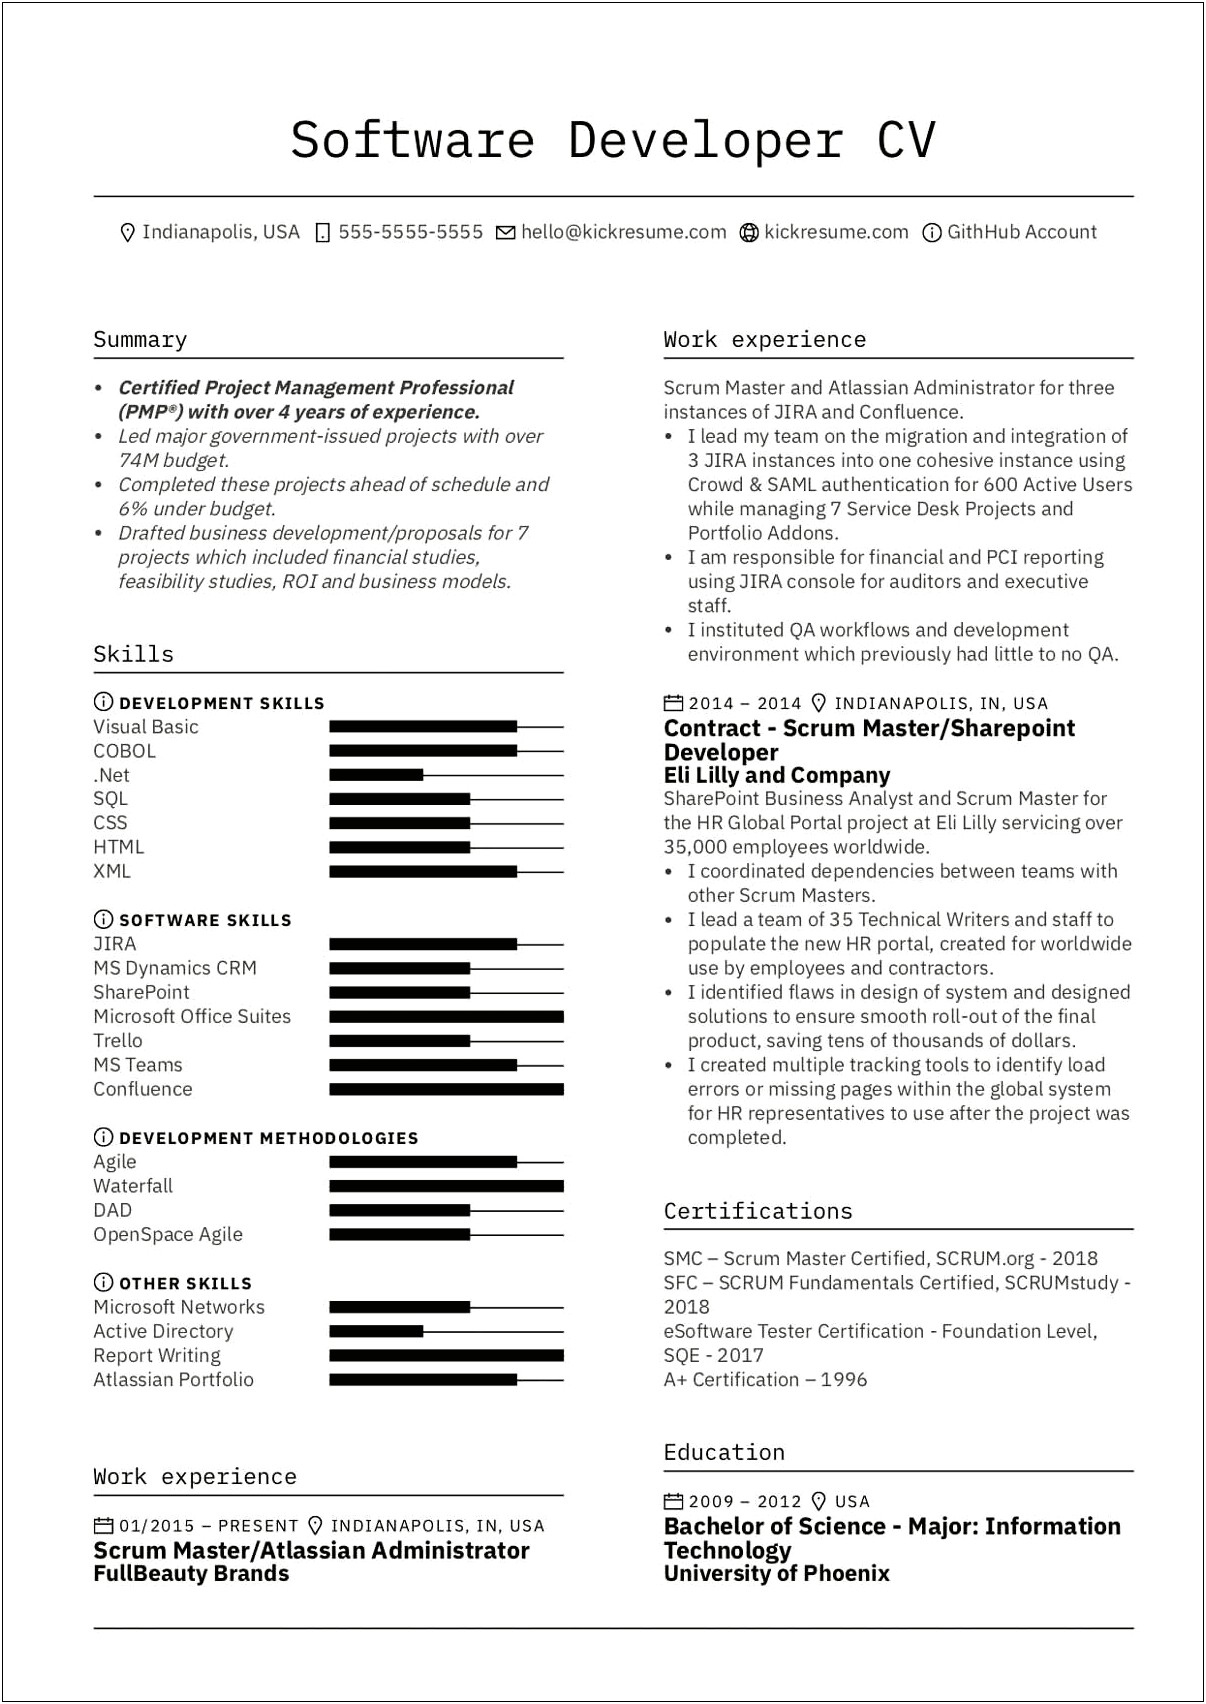 Best Summary Line For Engineer For Resume